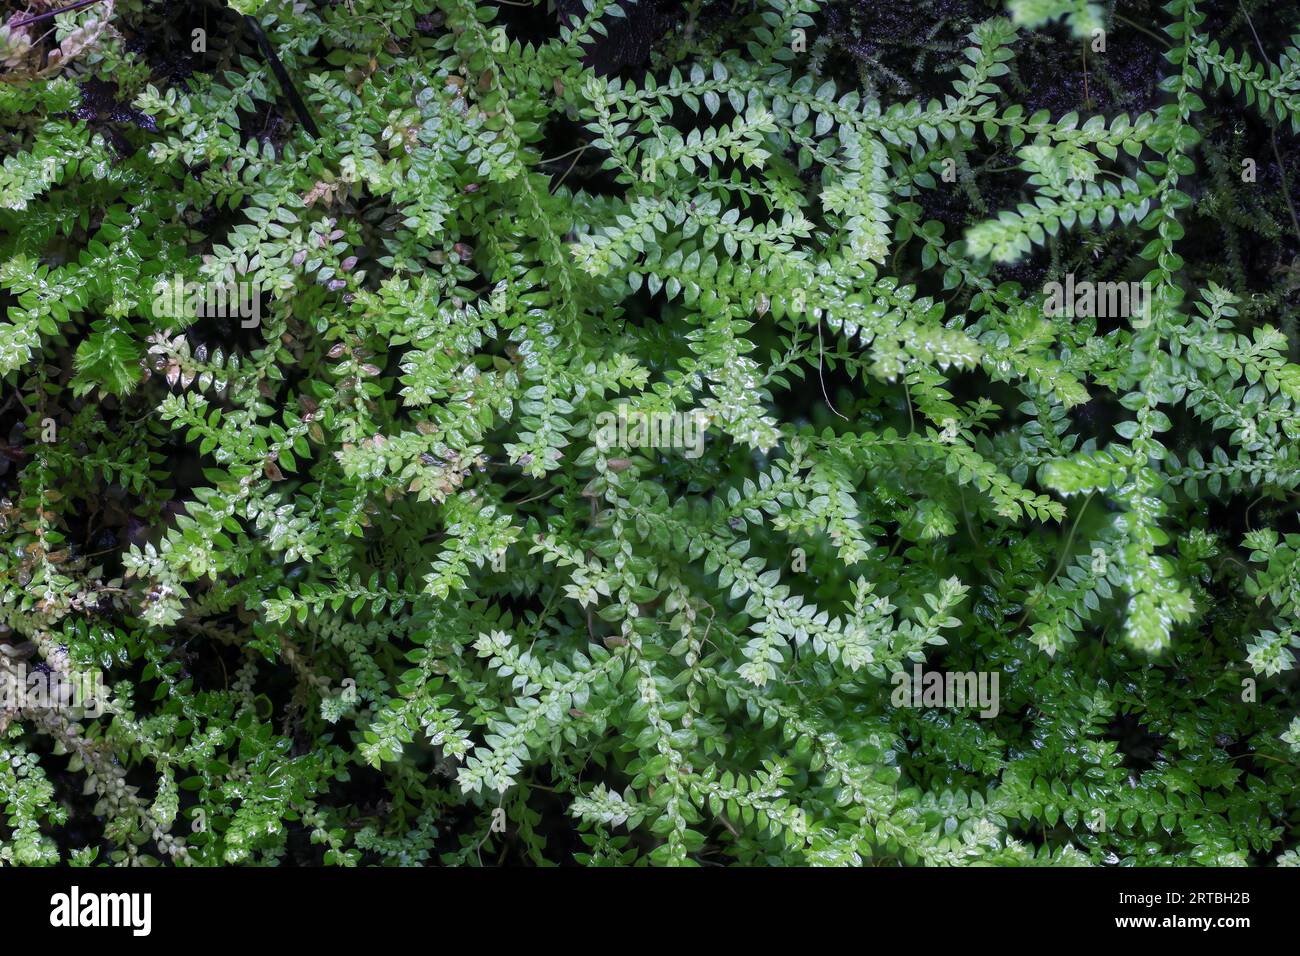 Toothed Clubmoss, Clubmoss, Denticulate selaginella, Denticulate spikemoss (Selaginella denticulata), growing on a rock, Canary Islands, La Palma Stock Photo